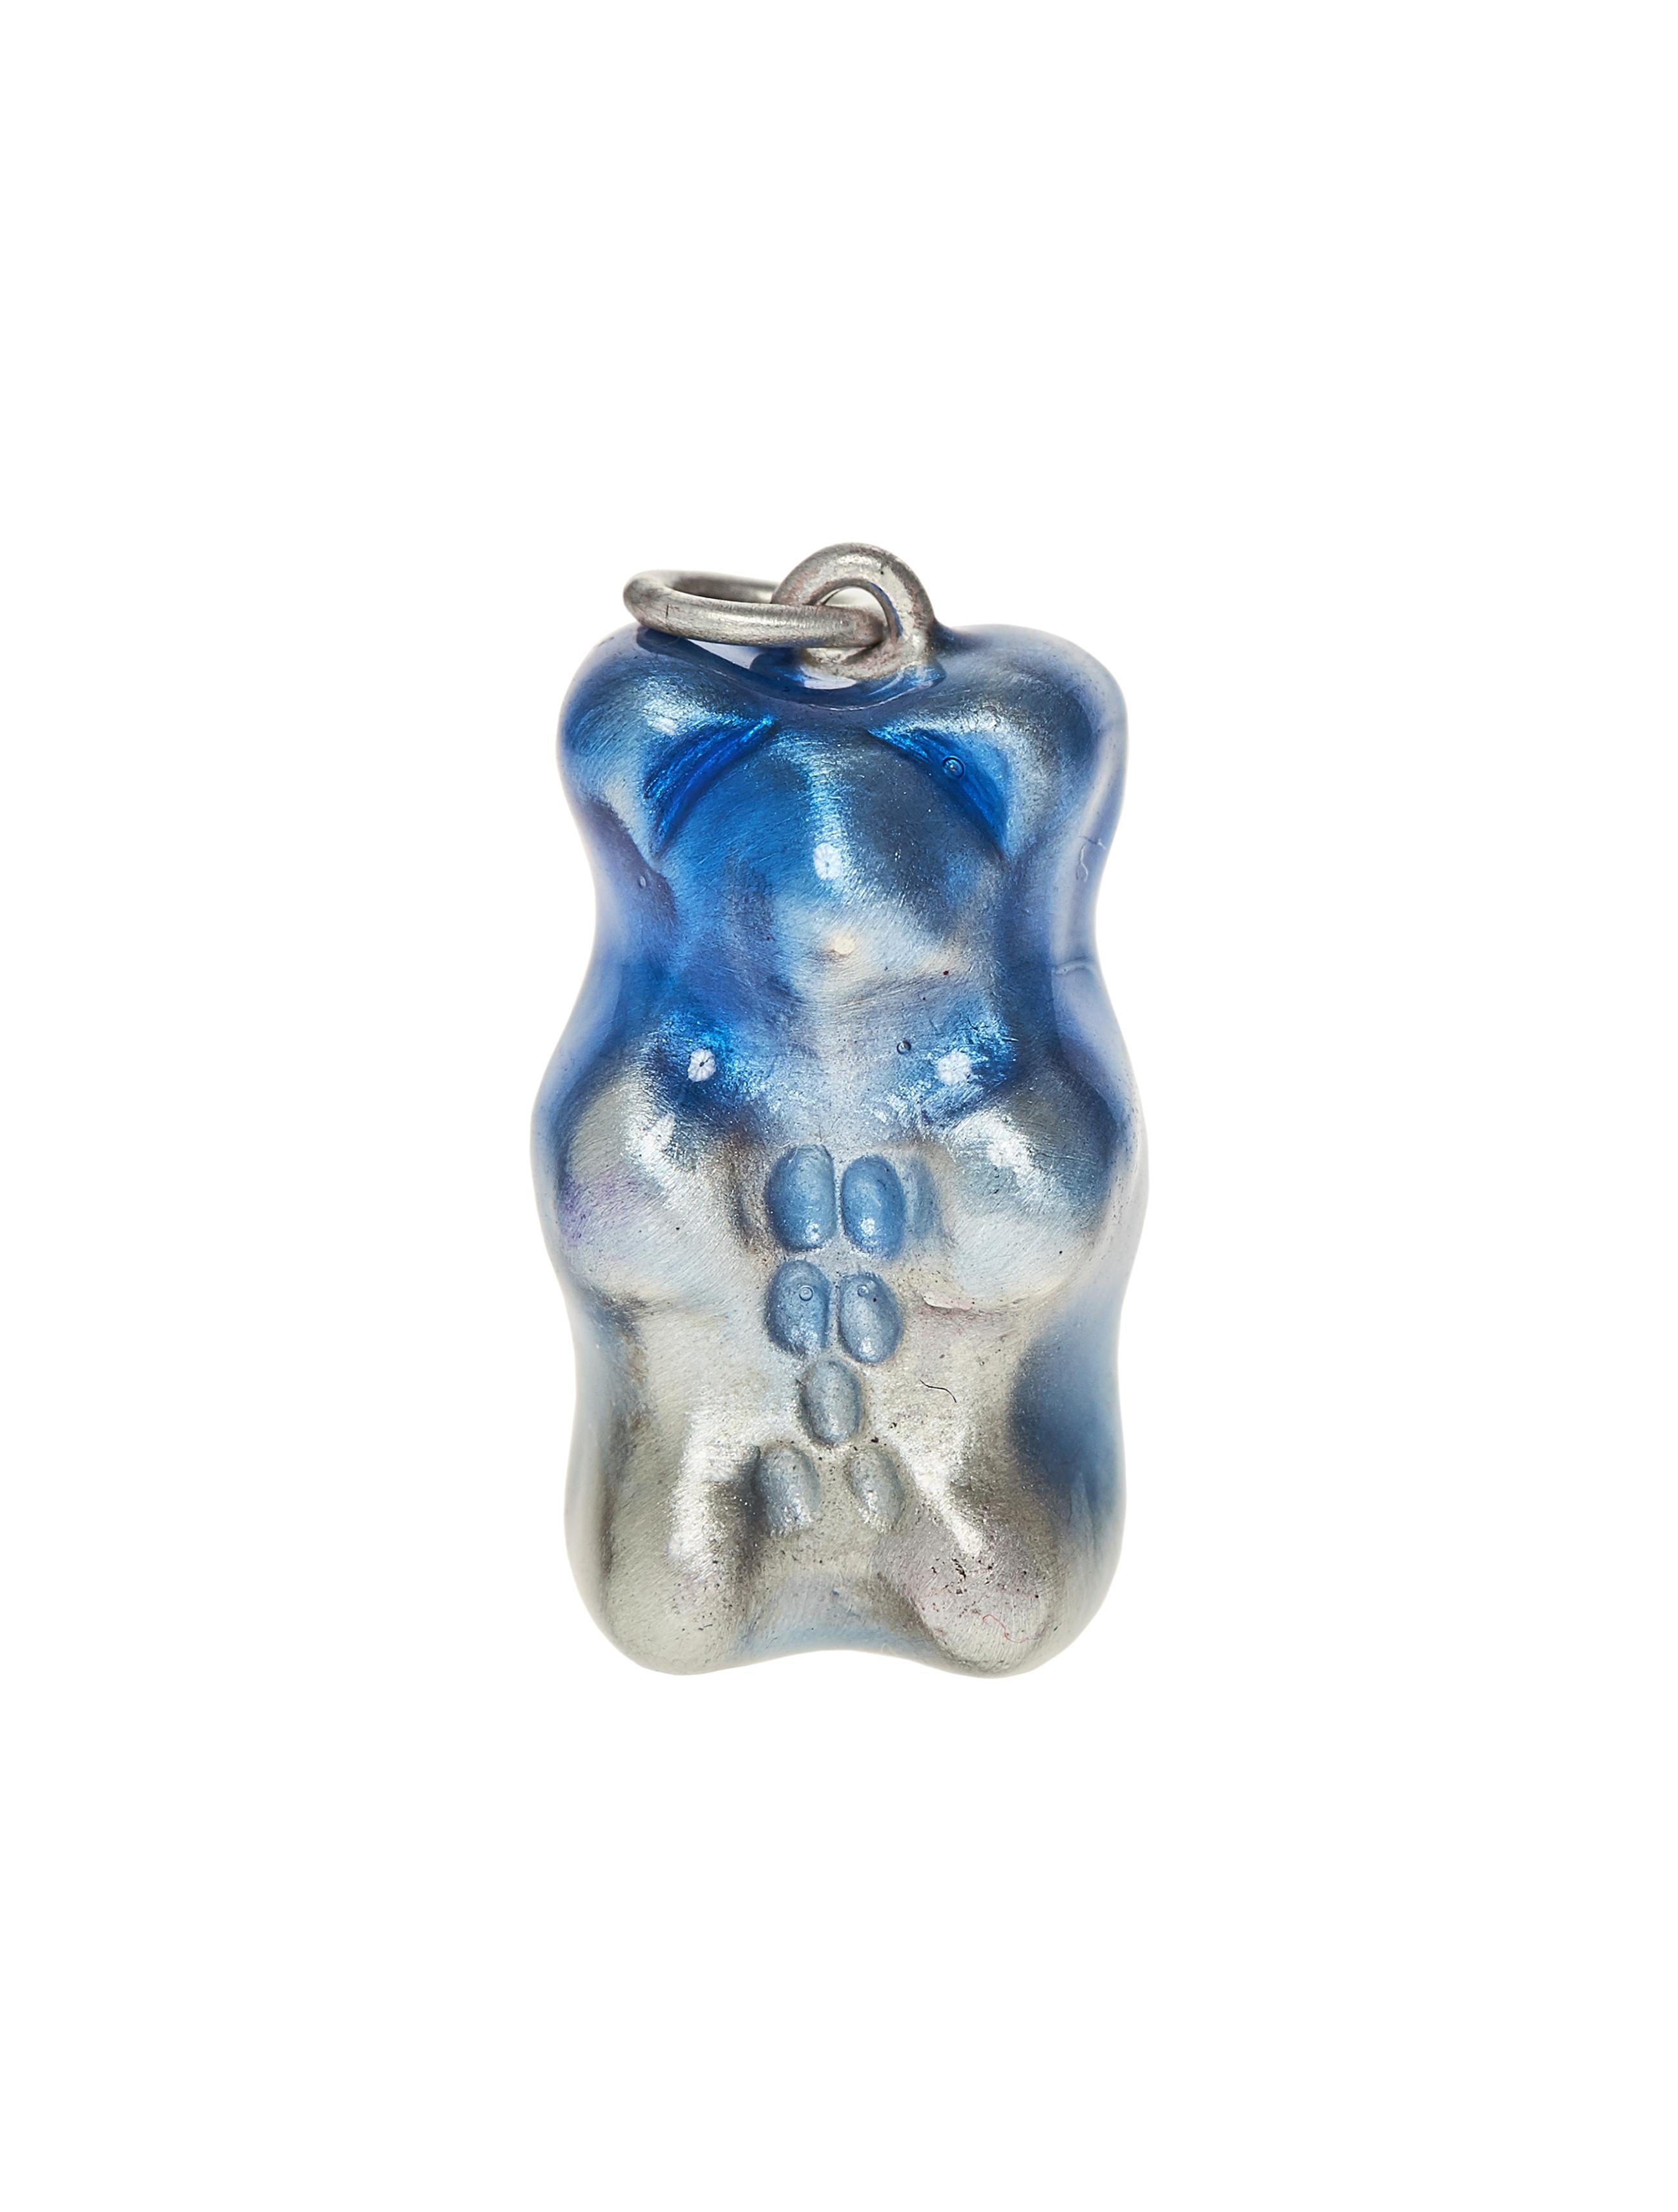 Ombre Blue 

Sterling  silver gummy bear pendant on silver  plated chain with transparent ombre blue enamel coverage. 

The Gummy Project by Maggoosh is a capsule collection inspired by the designer's life in New York City and her passion for